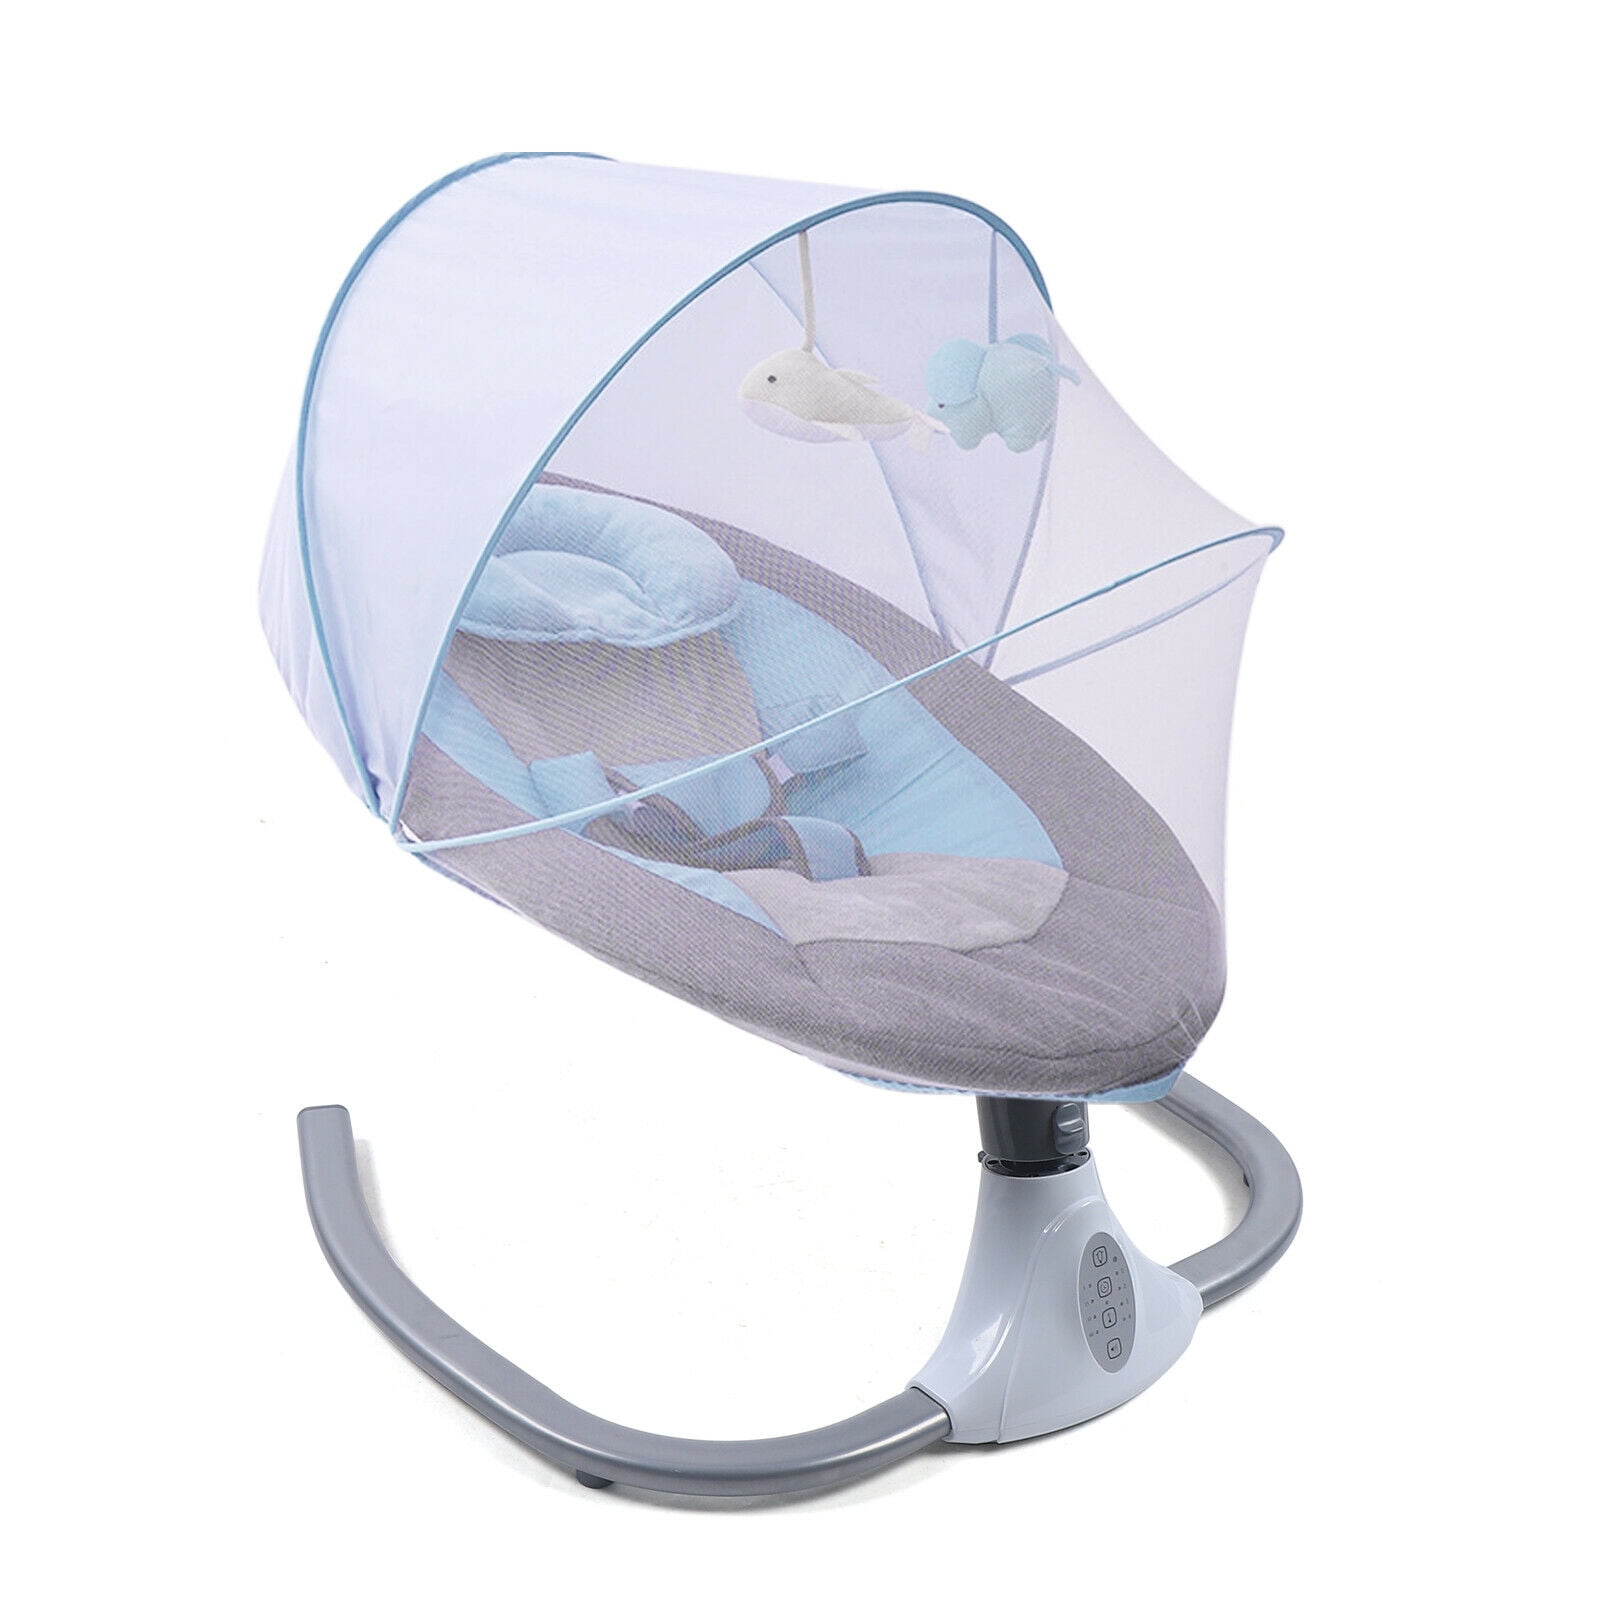 Gymax Baby Swing Electric Rocking Chair w/ Music Timer Mosquito Net  Beige/Gray